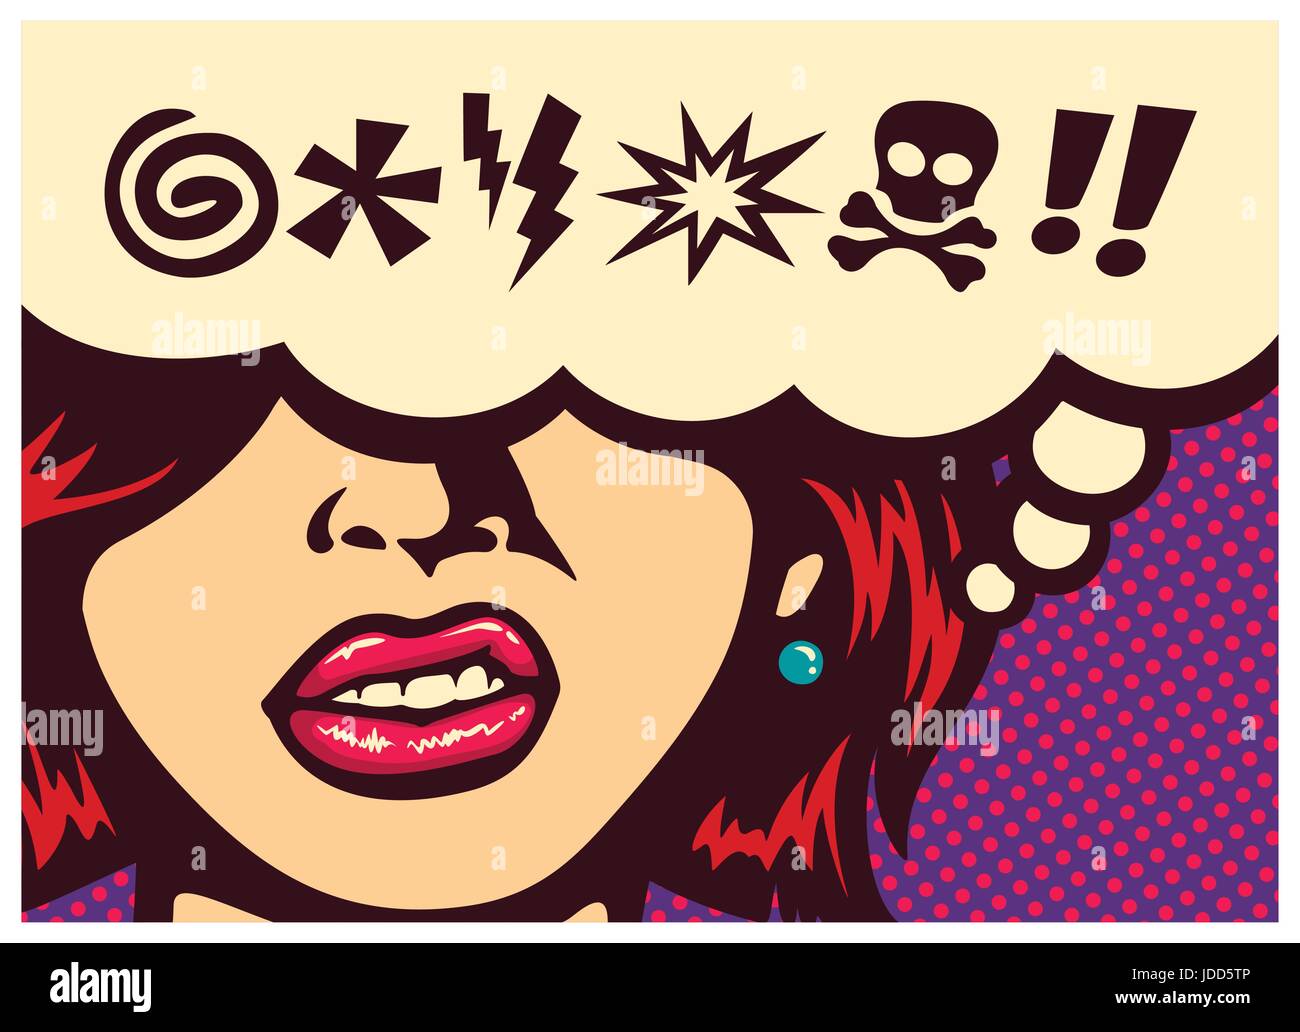 Pop art style comics panel angry woman grinding teeth with speech bubble and swear words symbols vector poster design illustration Stock Vector